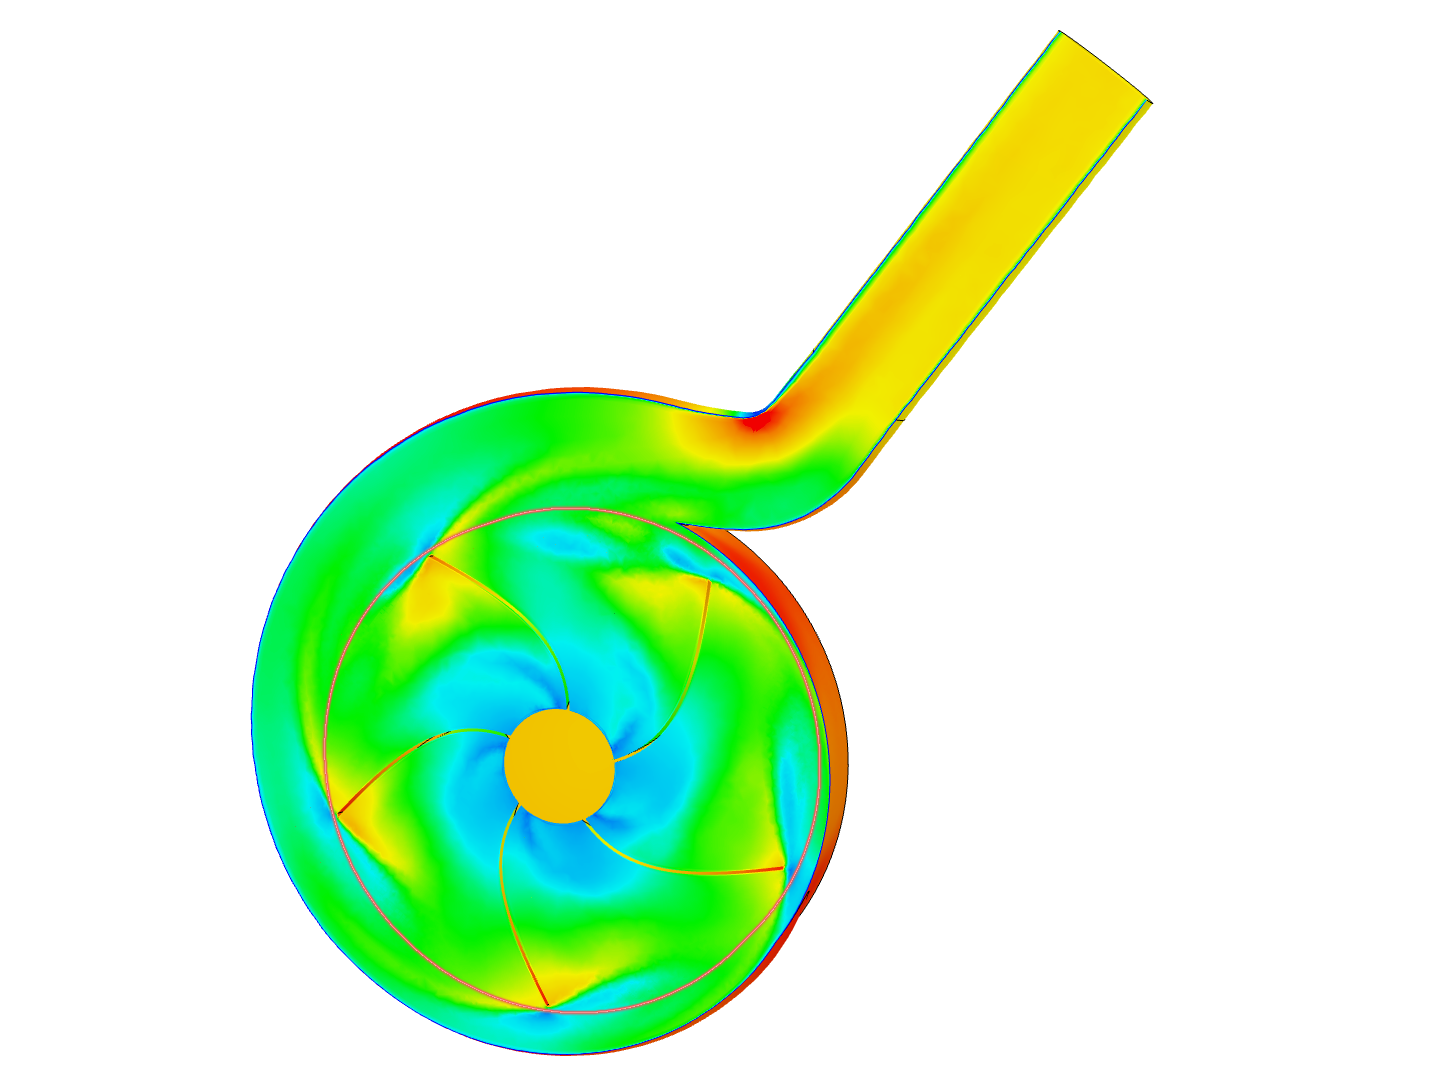 Coursera - Modeling and Simulation of Centrifugal Pump Performance image